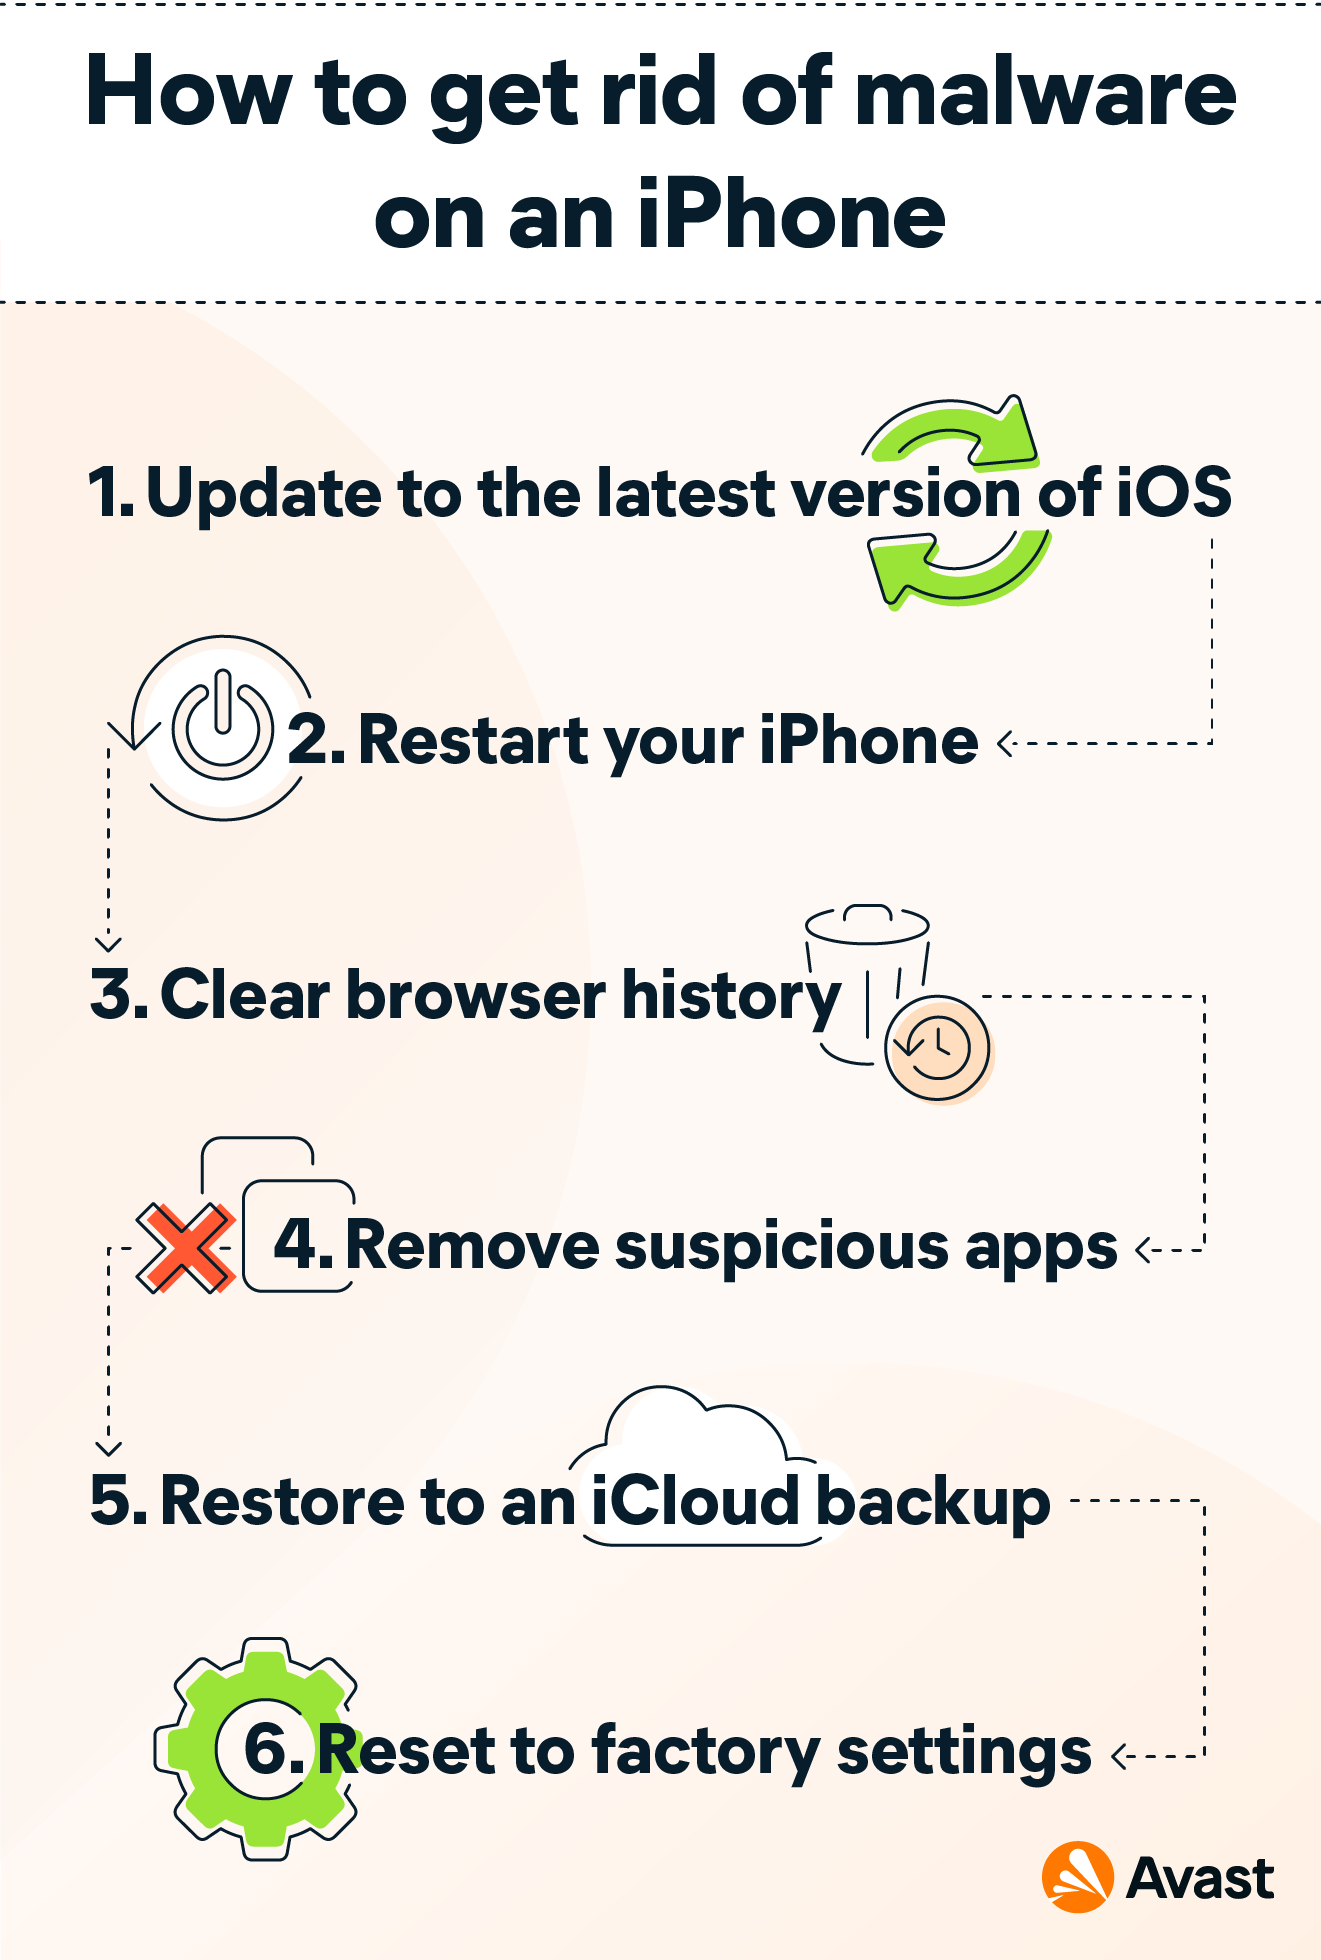  How to remove malware from iPhone.